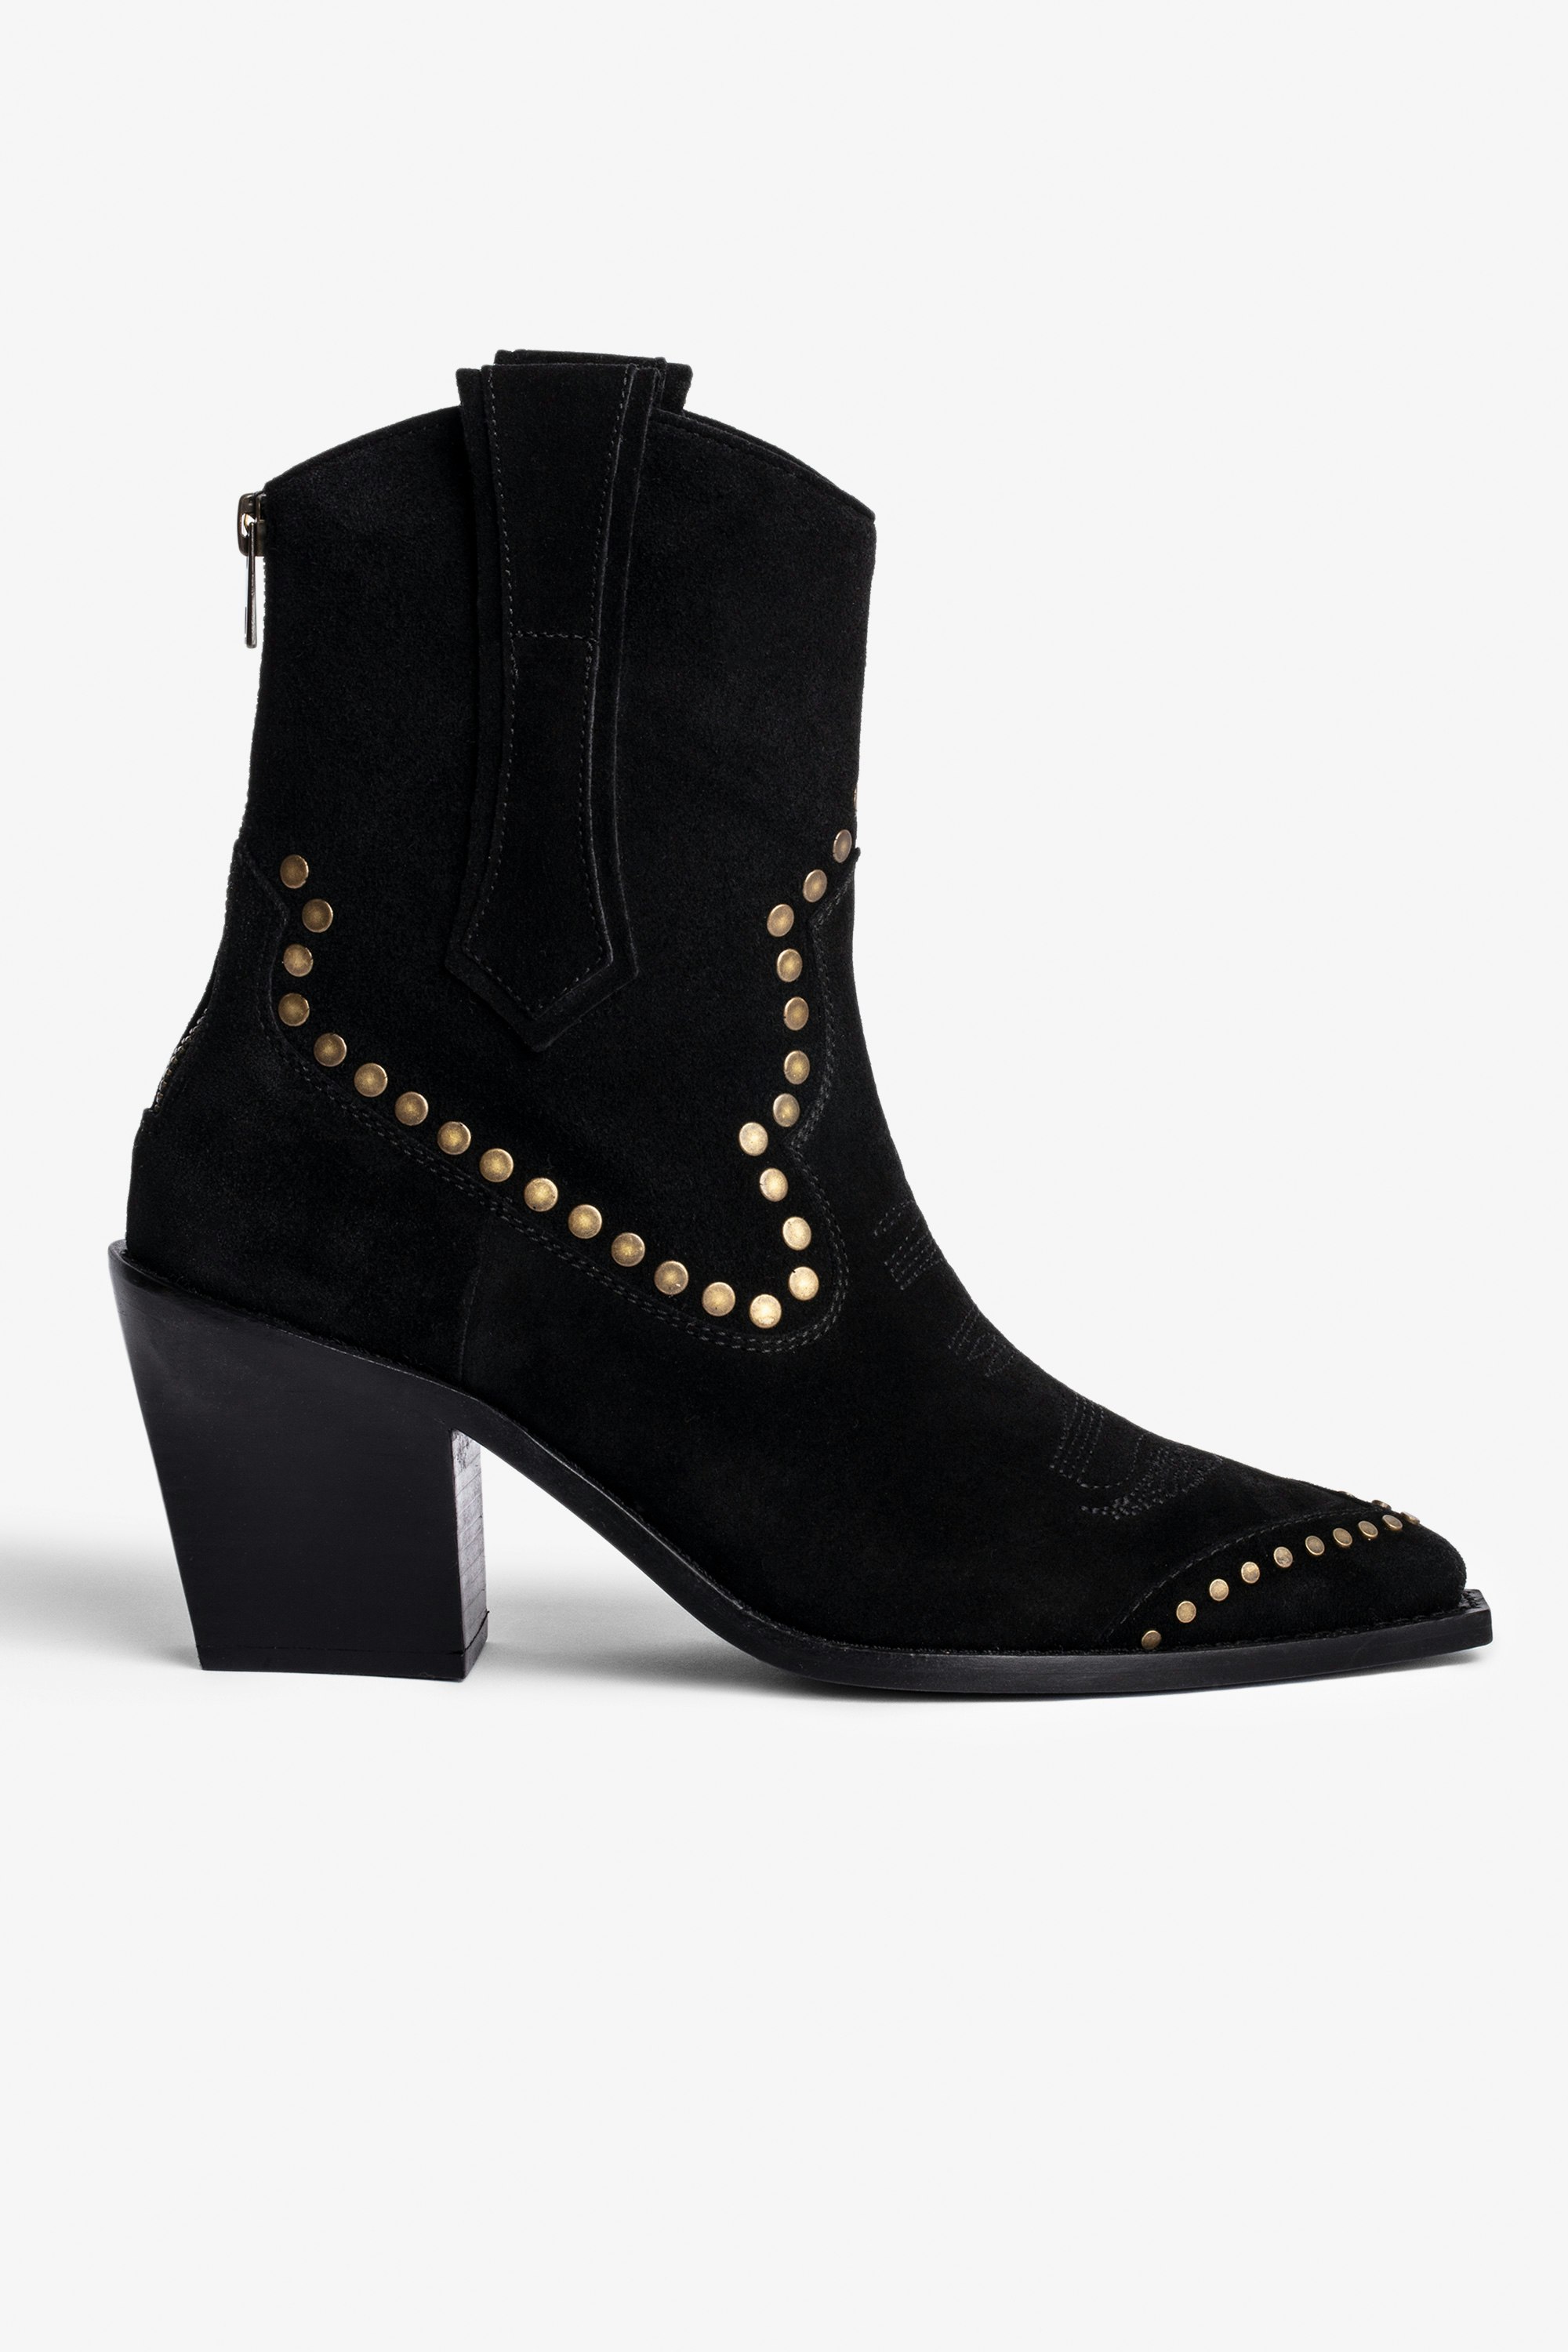 Cara High Boots undefined